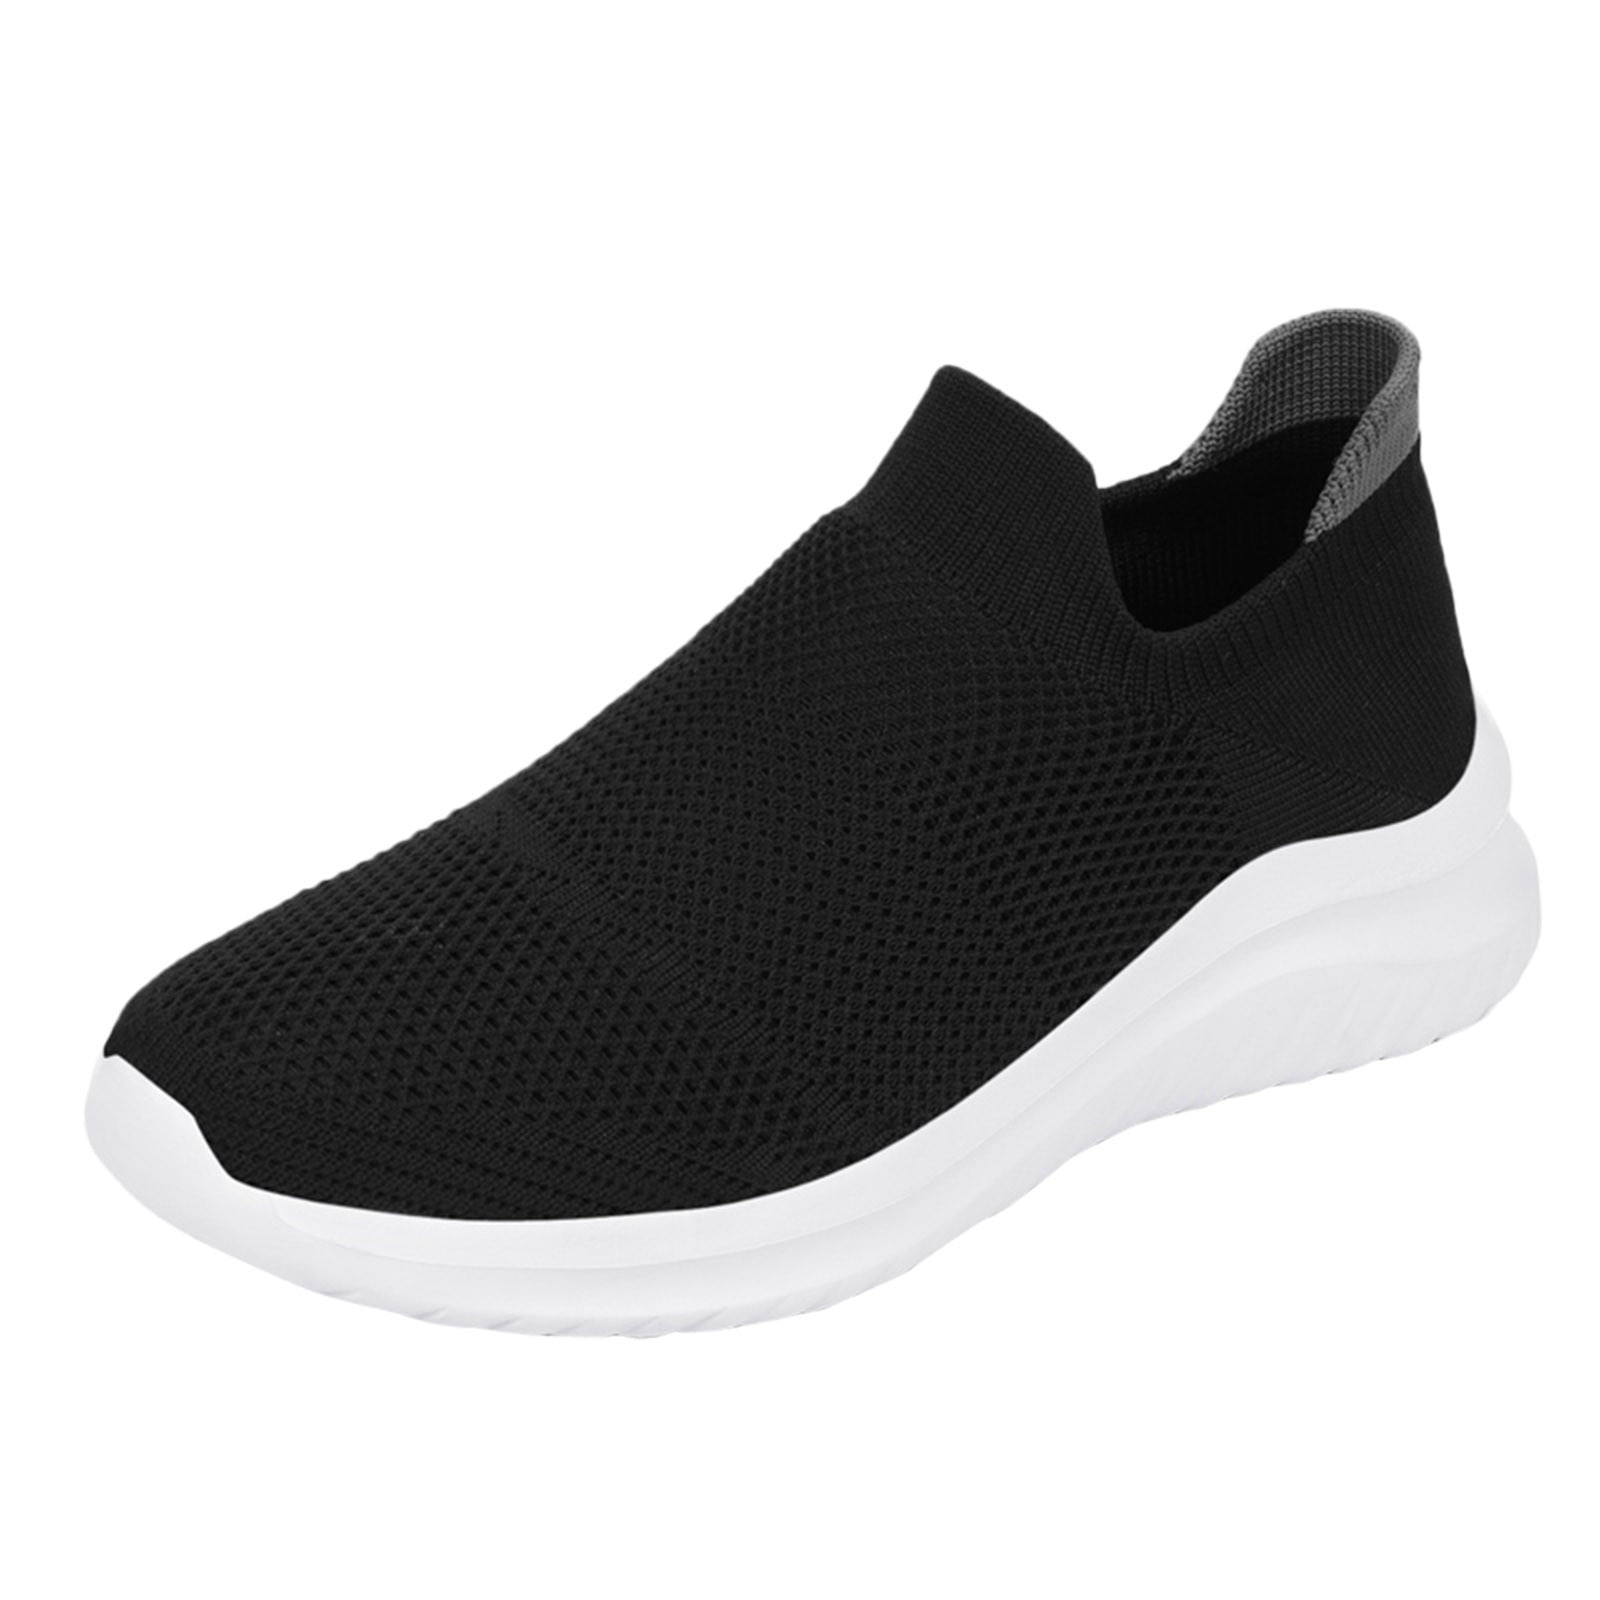 ZIZOCWA Most Comfortable Shoes For Men Mens Slip On Sneaker